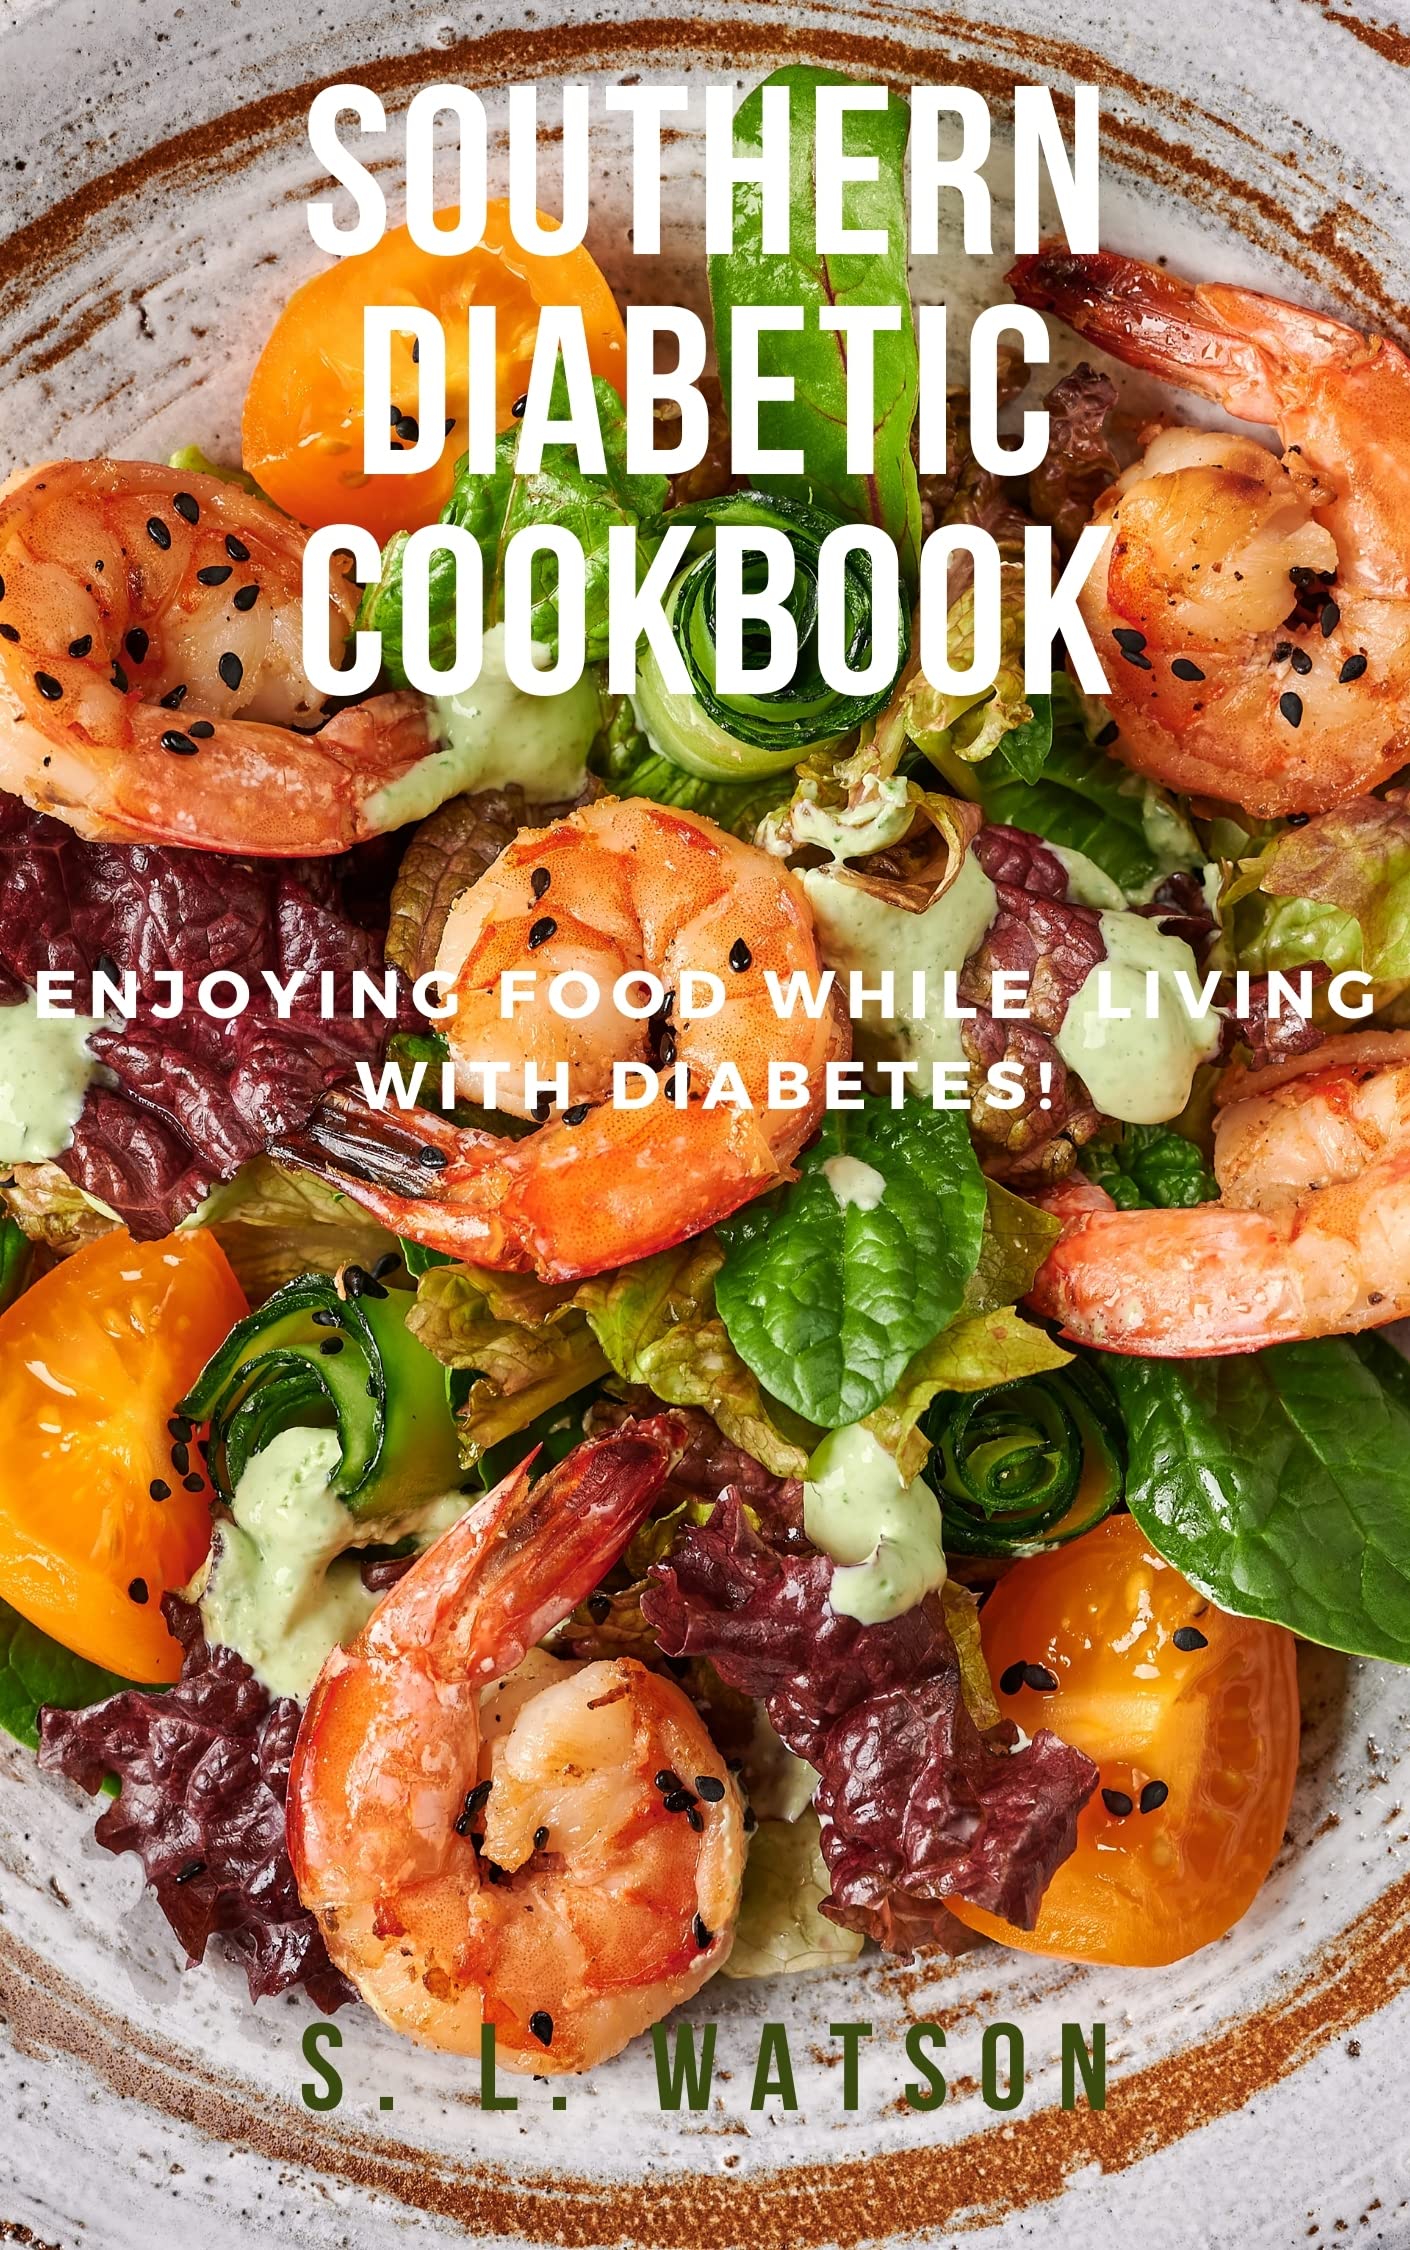 Southern Diabetic Cookbook: Enjoying Food While Living With Diabetes! (Remembering Southern Heritage Series Book 7)